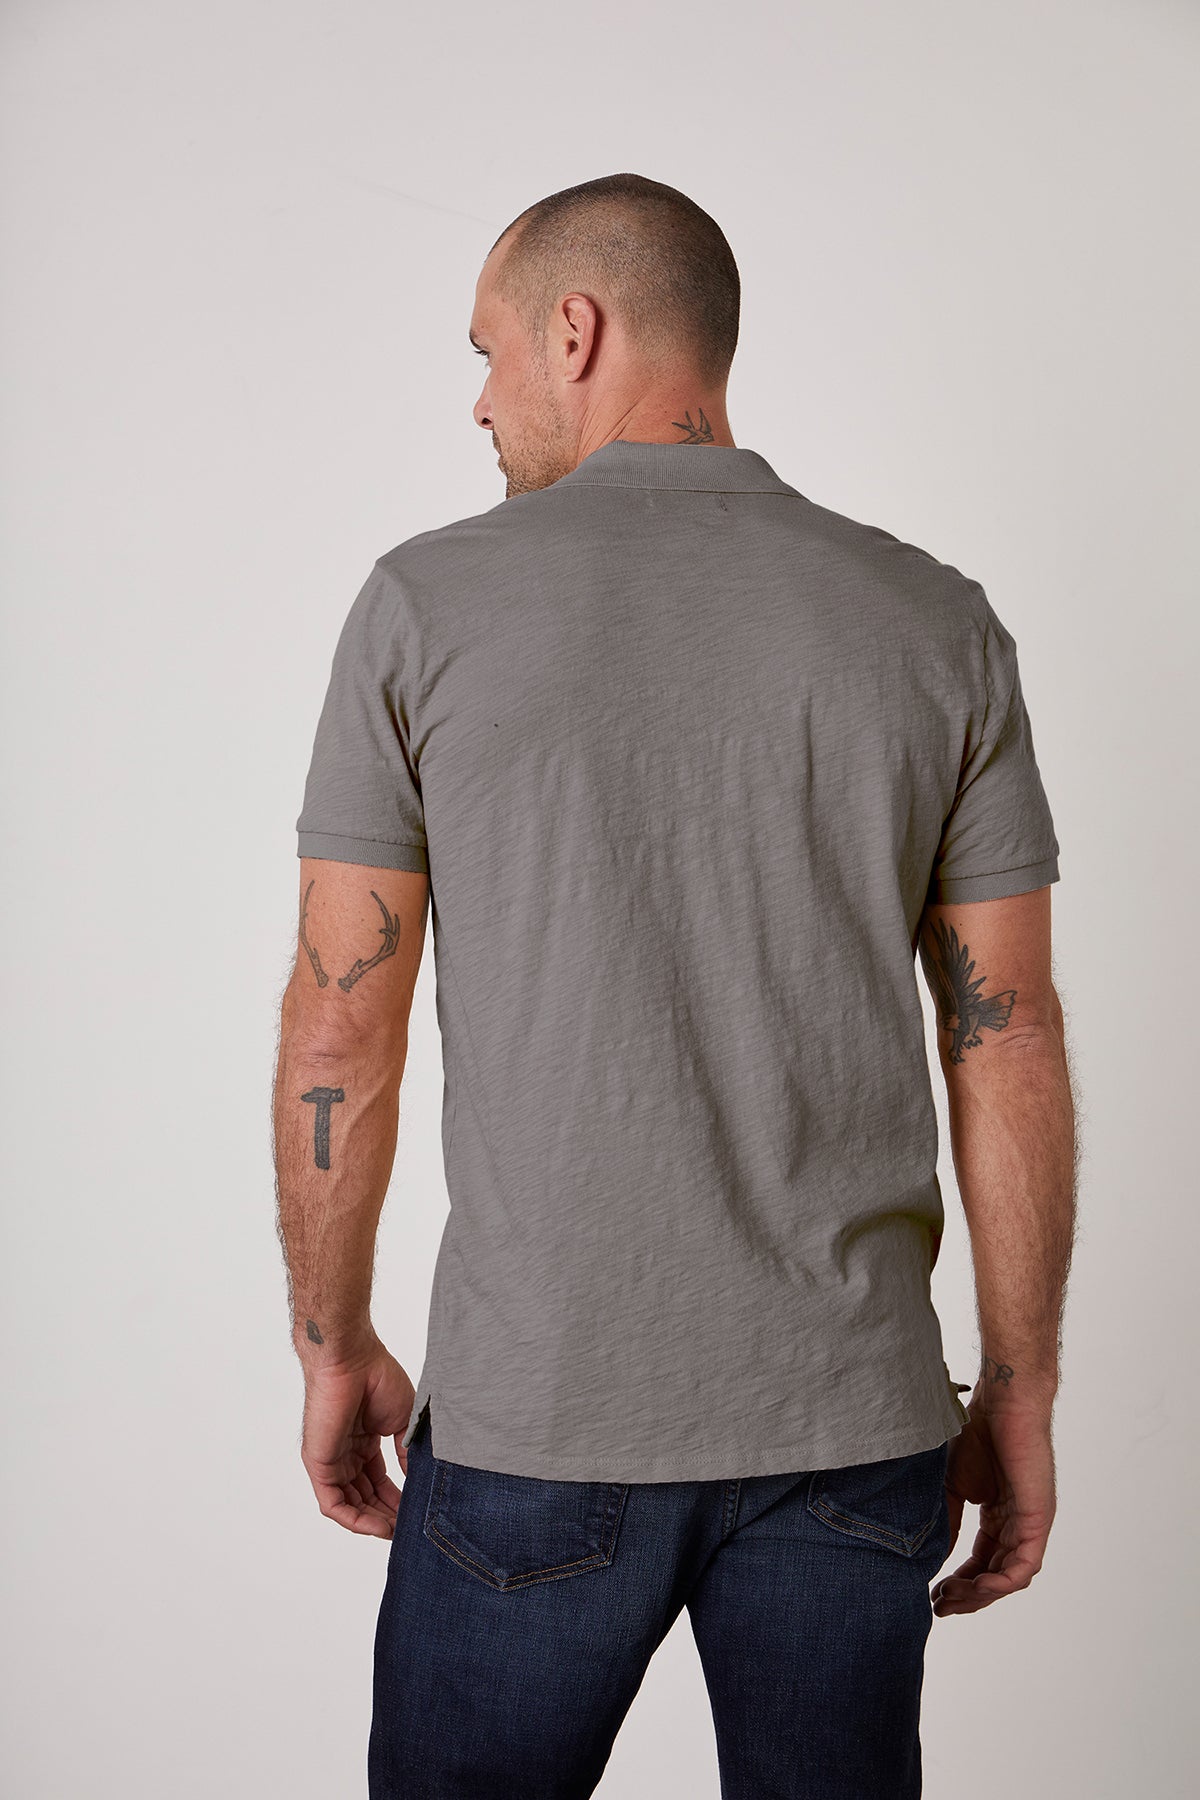   The NIKO POLO by Velvet by Graham & Spencer showcases the timeless style of a man wearing jeans and a grey polo shirt. 